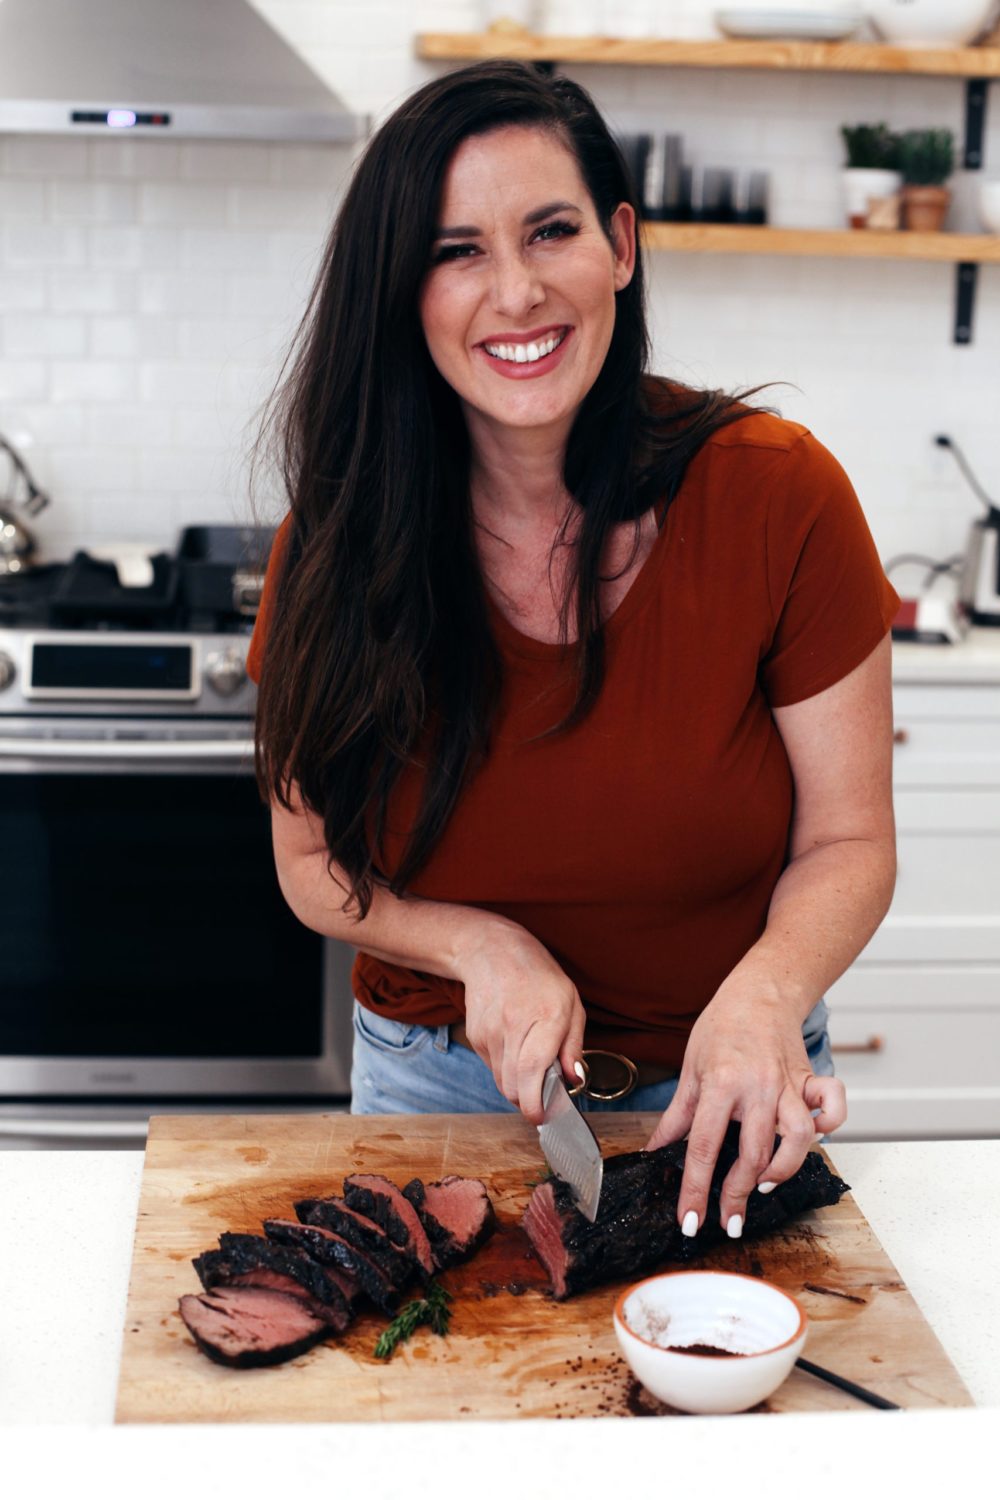 Best Way to Cook Beef Tenderloin with Espresso Crusted Chateaubriand Recipe from top Florida lifestyle blogger Tabitha Blue of Fresh Mommy Blog. How to get deliciously tender steak every time and the best coffee steak rub. | Best Beef Tenderloin by popular Florida lifestyle blog, Fresh Mommy Blog: image of a woman slicing Espresso Crusted Chateaubriand beef tenderloin. 